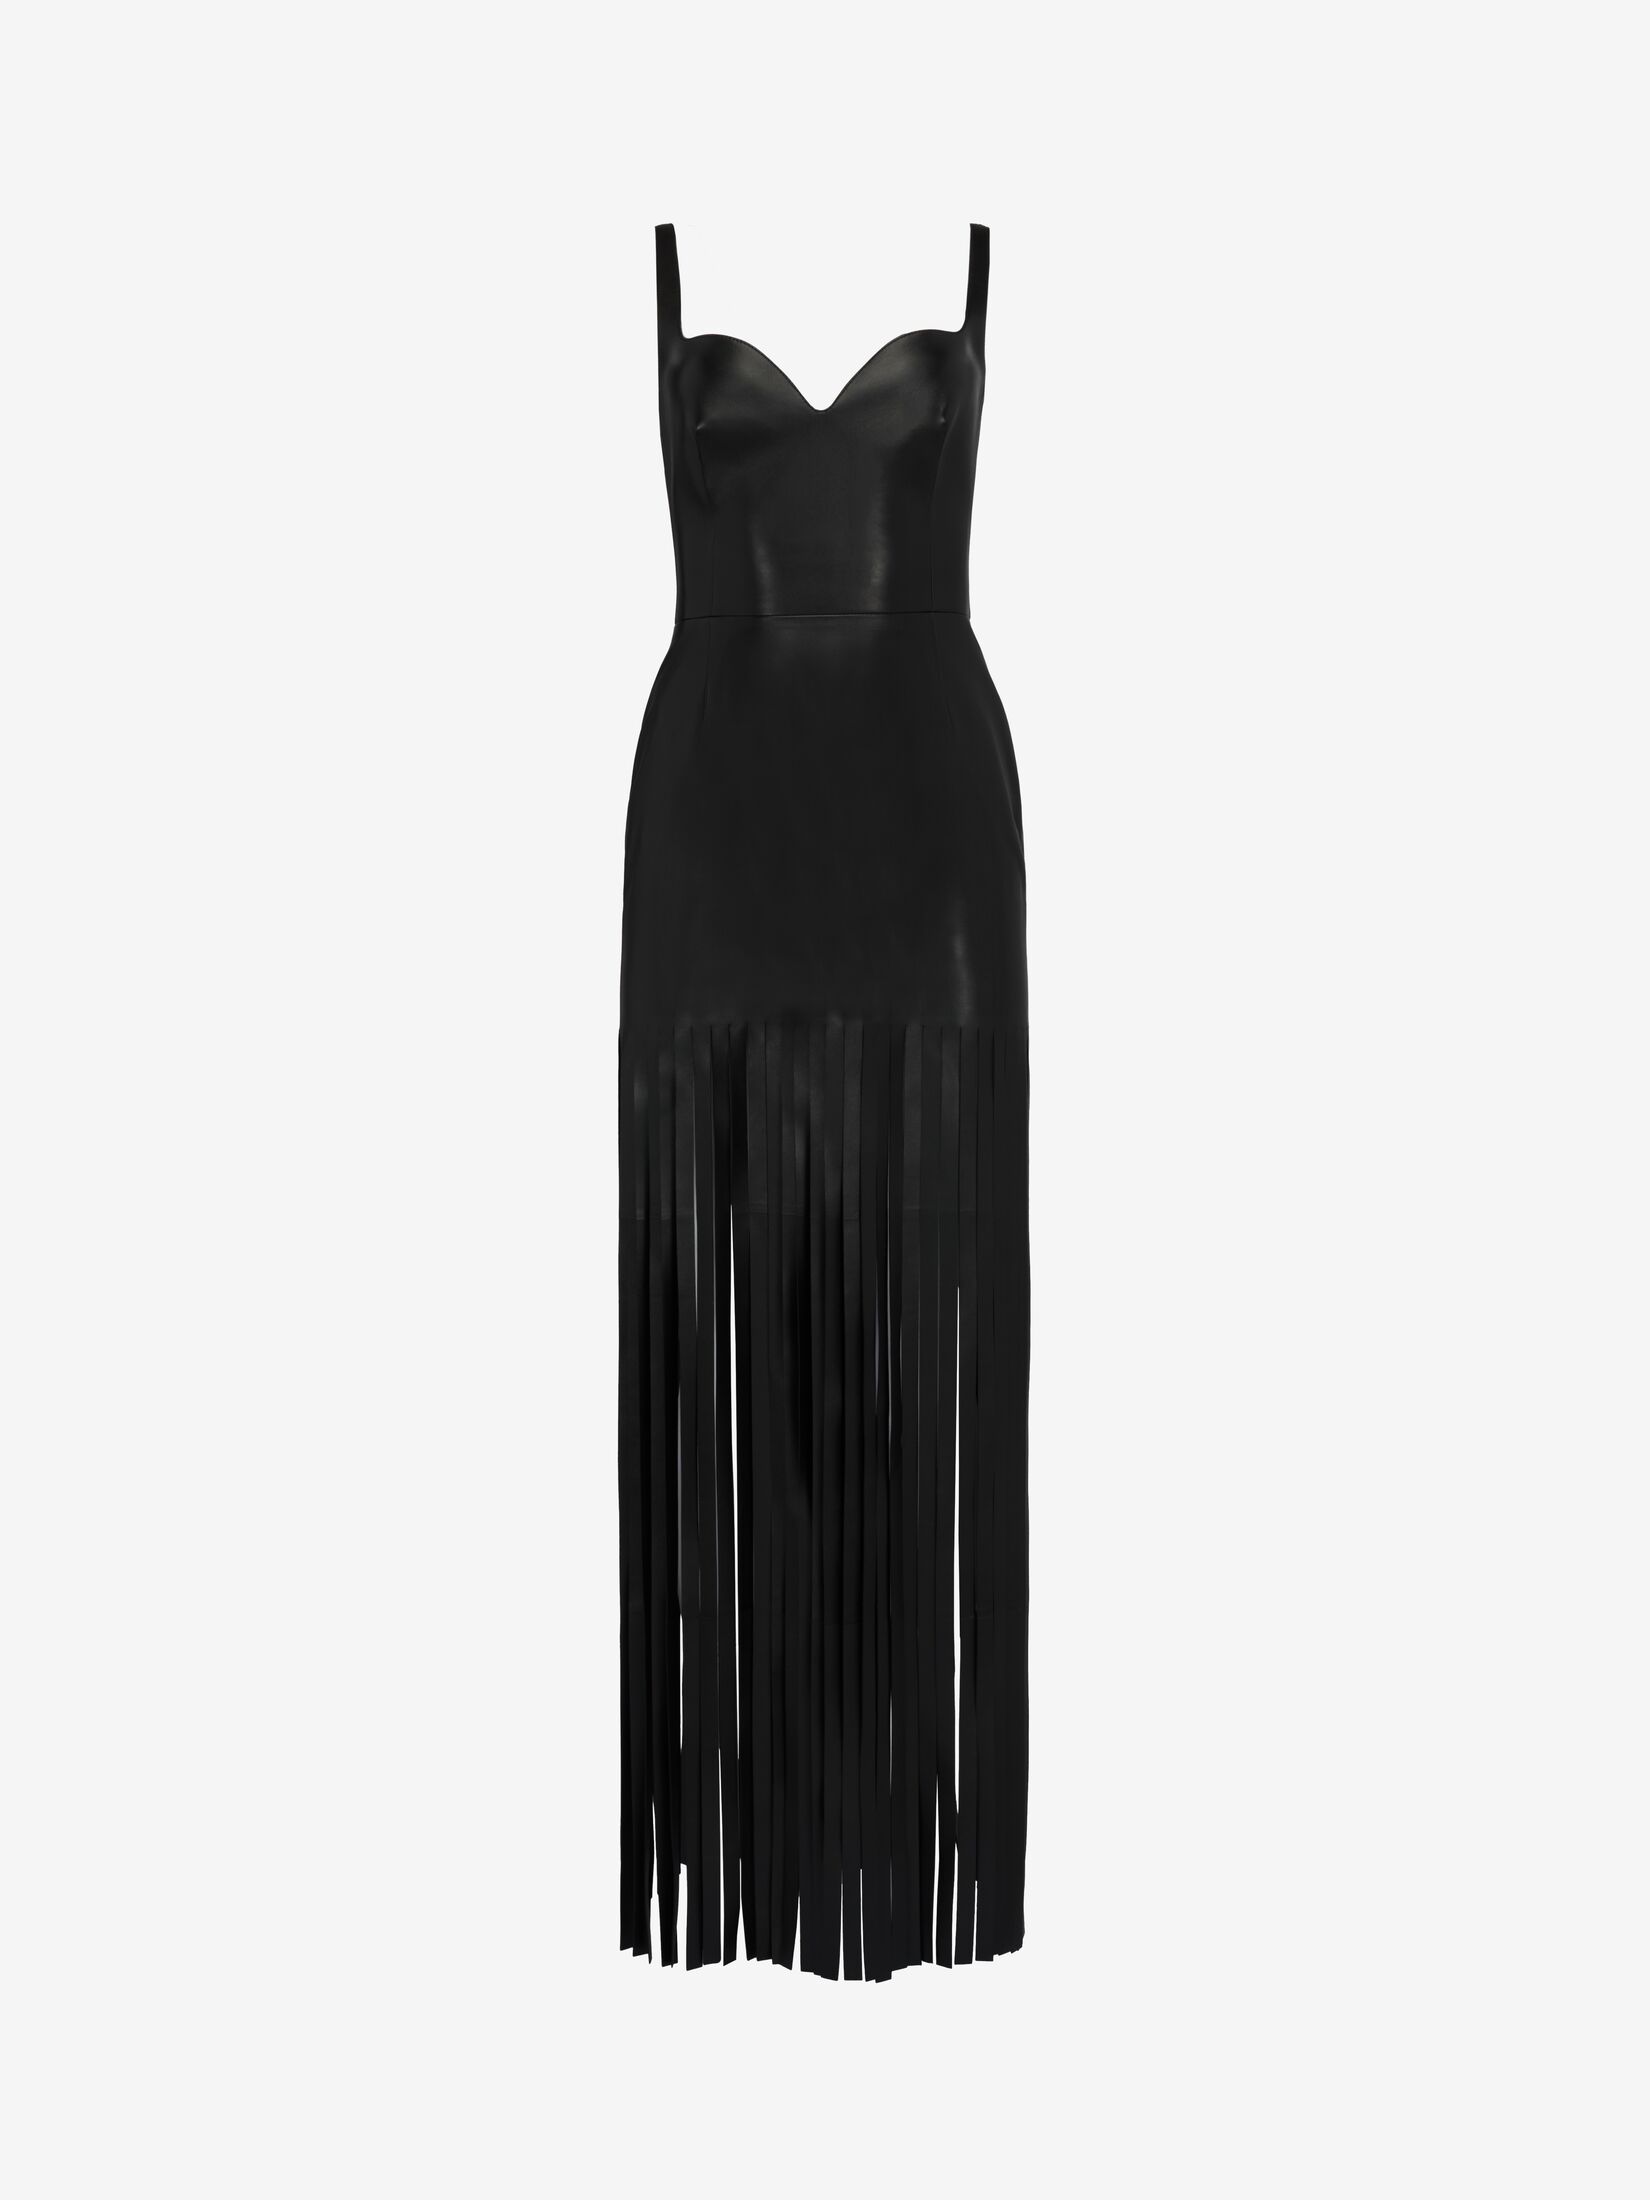 Fringed Leather Pencil Dress